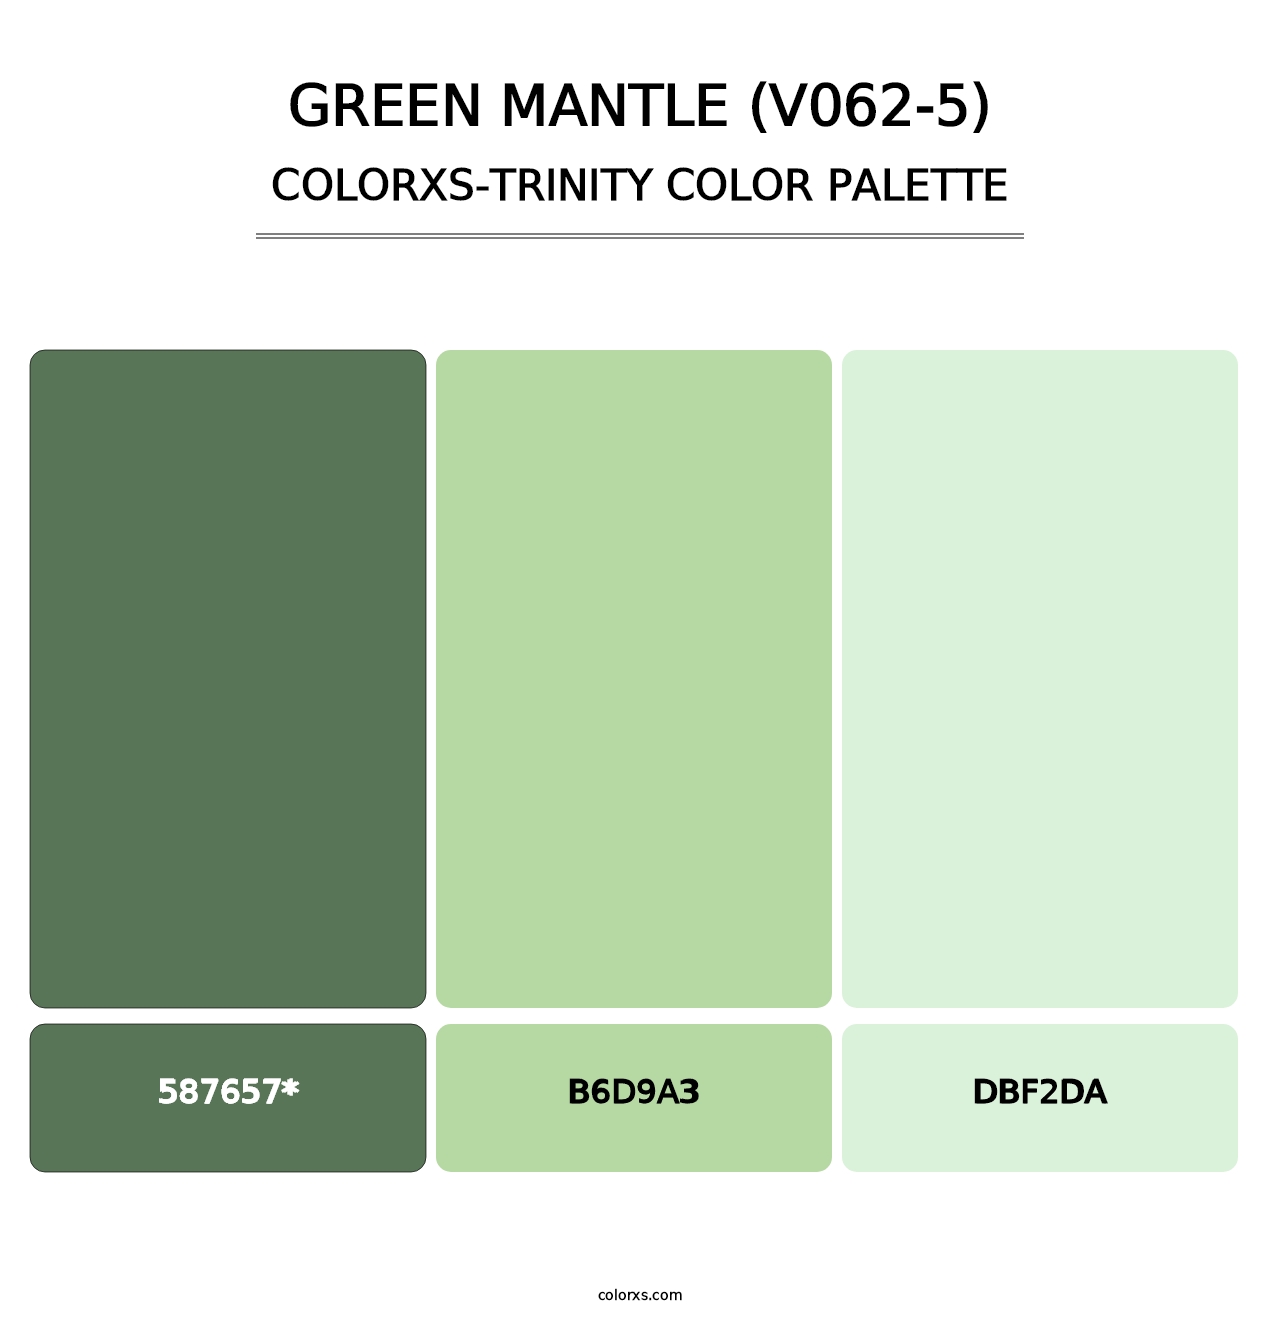 Green Mantle (V062-5) - Colorxs Trinity Palette